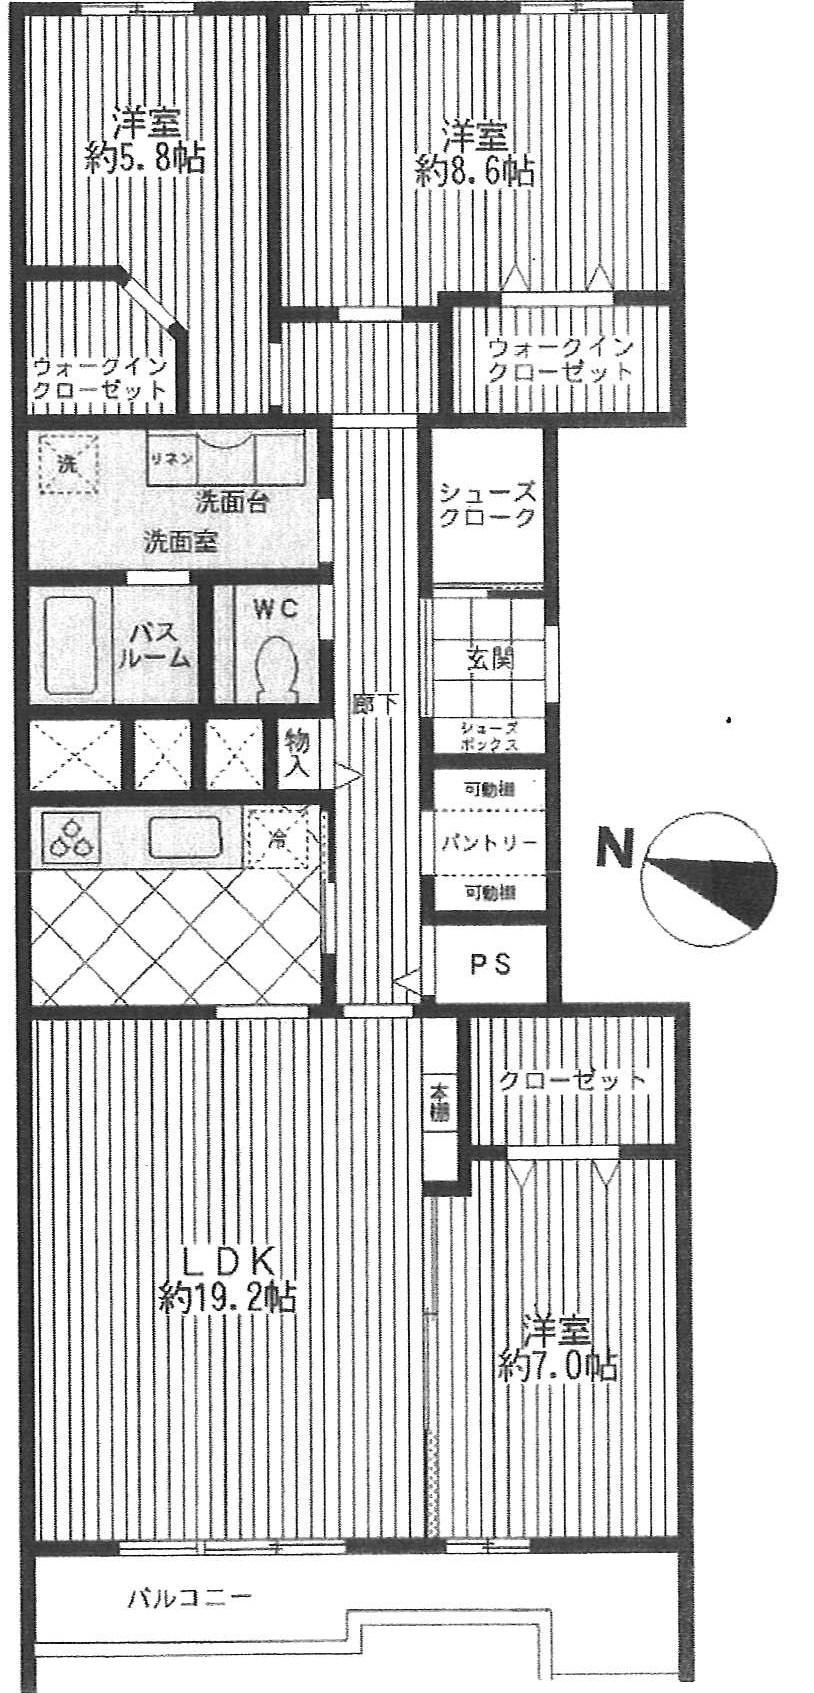 Floor plan. 3LDK, Price 39,800,000 yen, Footprint 107.59 sq m , Balcony area 10.85 sq m 2013 the end of January Interior renovation scheduled to be completed